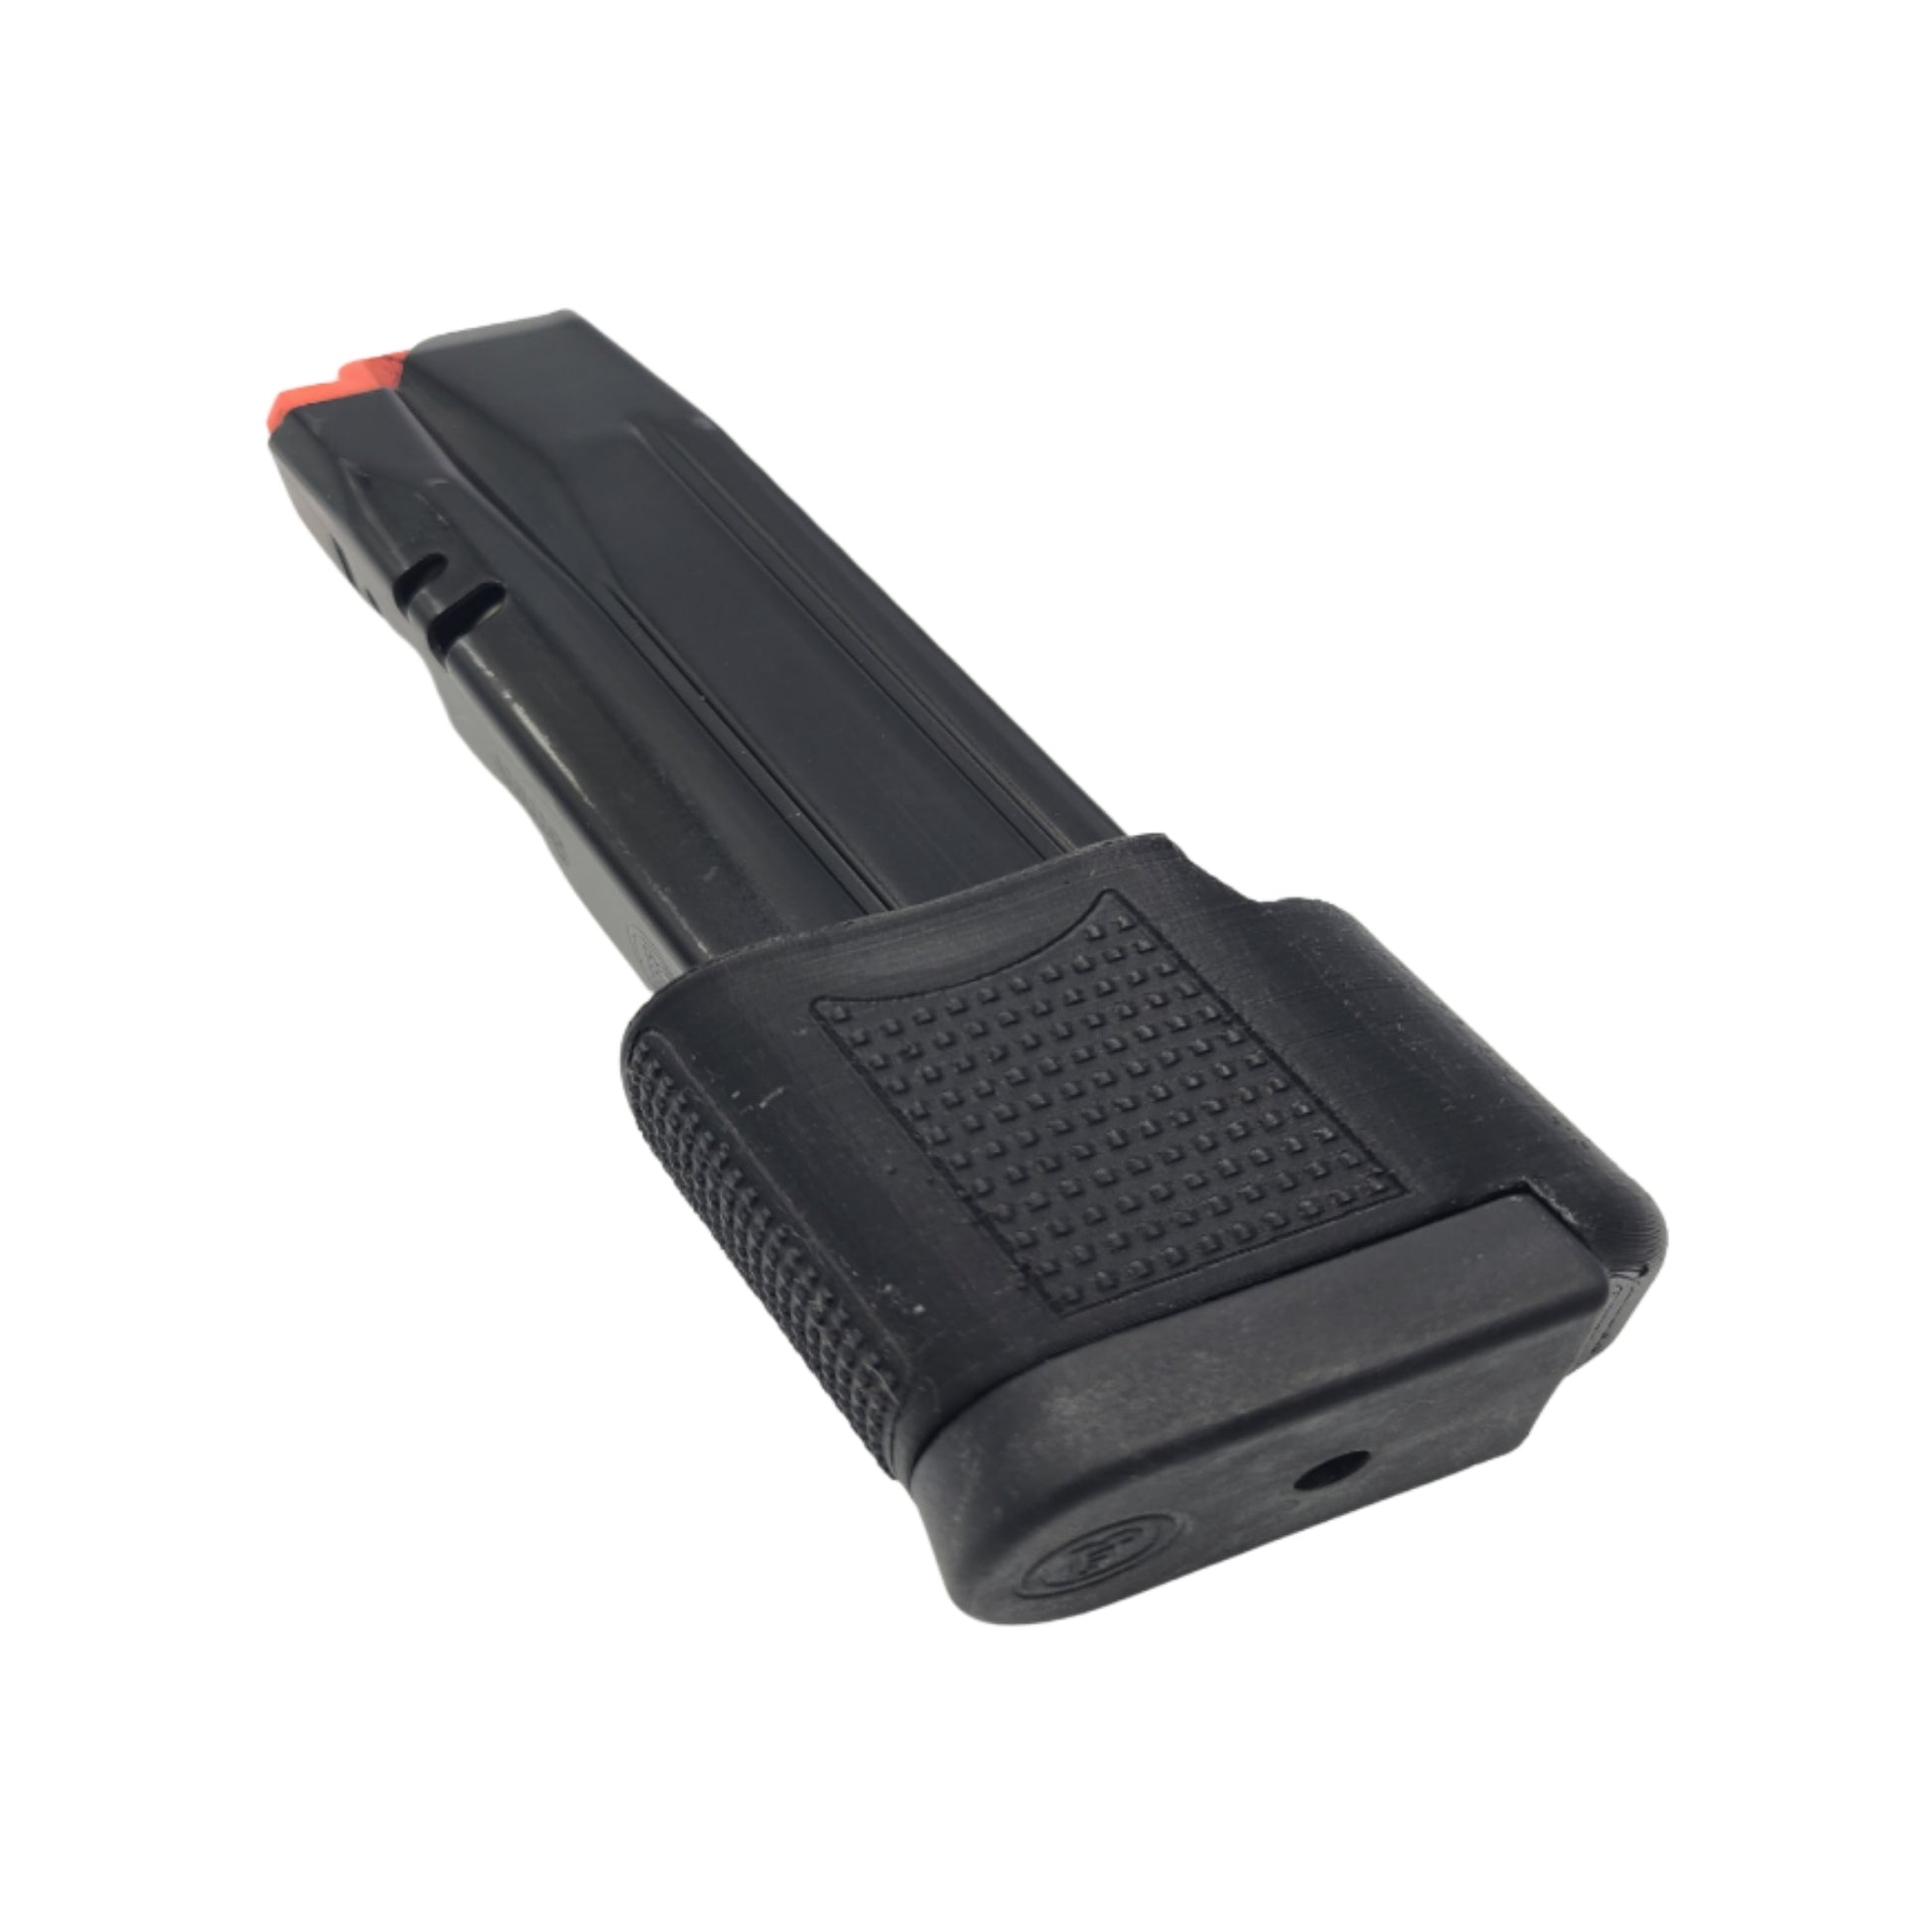 CZ P10s Magazine Sleeve. Used to adapt the CZ P10F 19 round magazines to the subcompact frame.